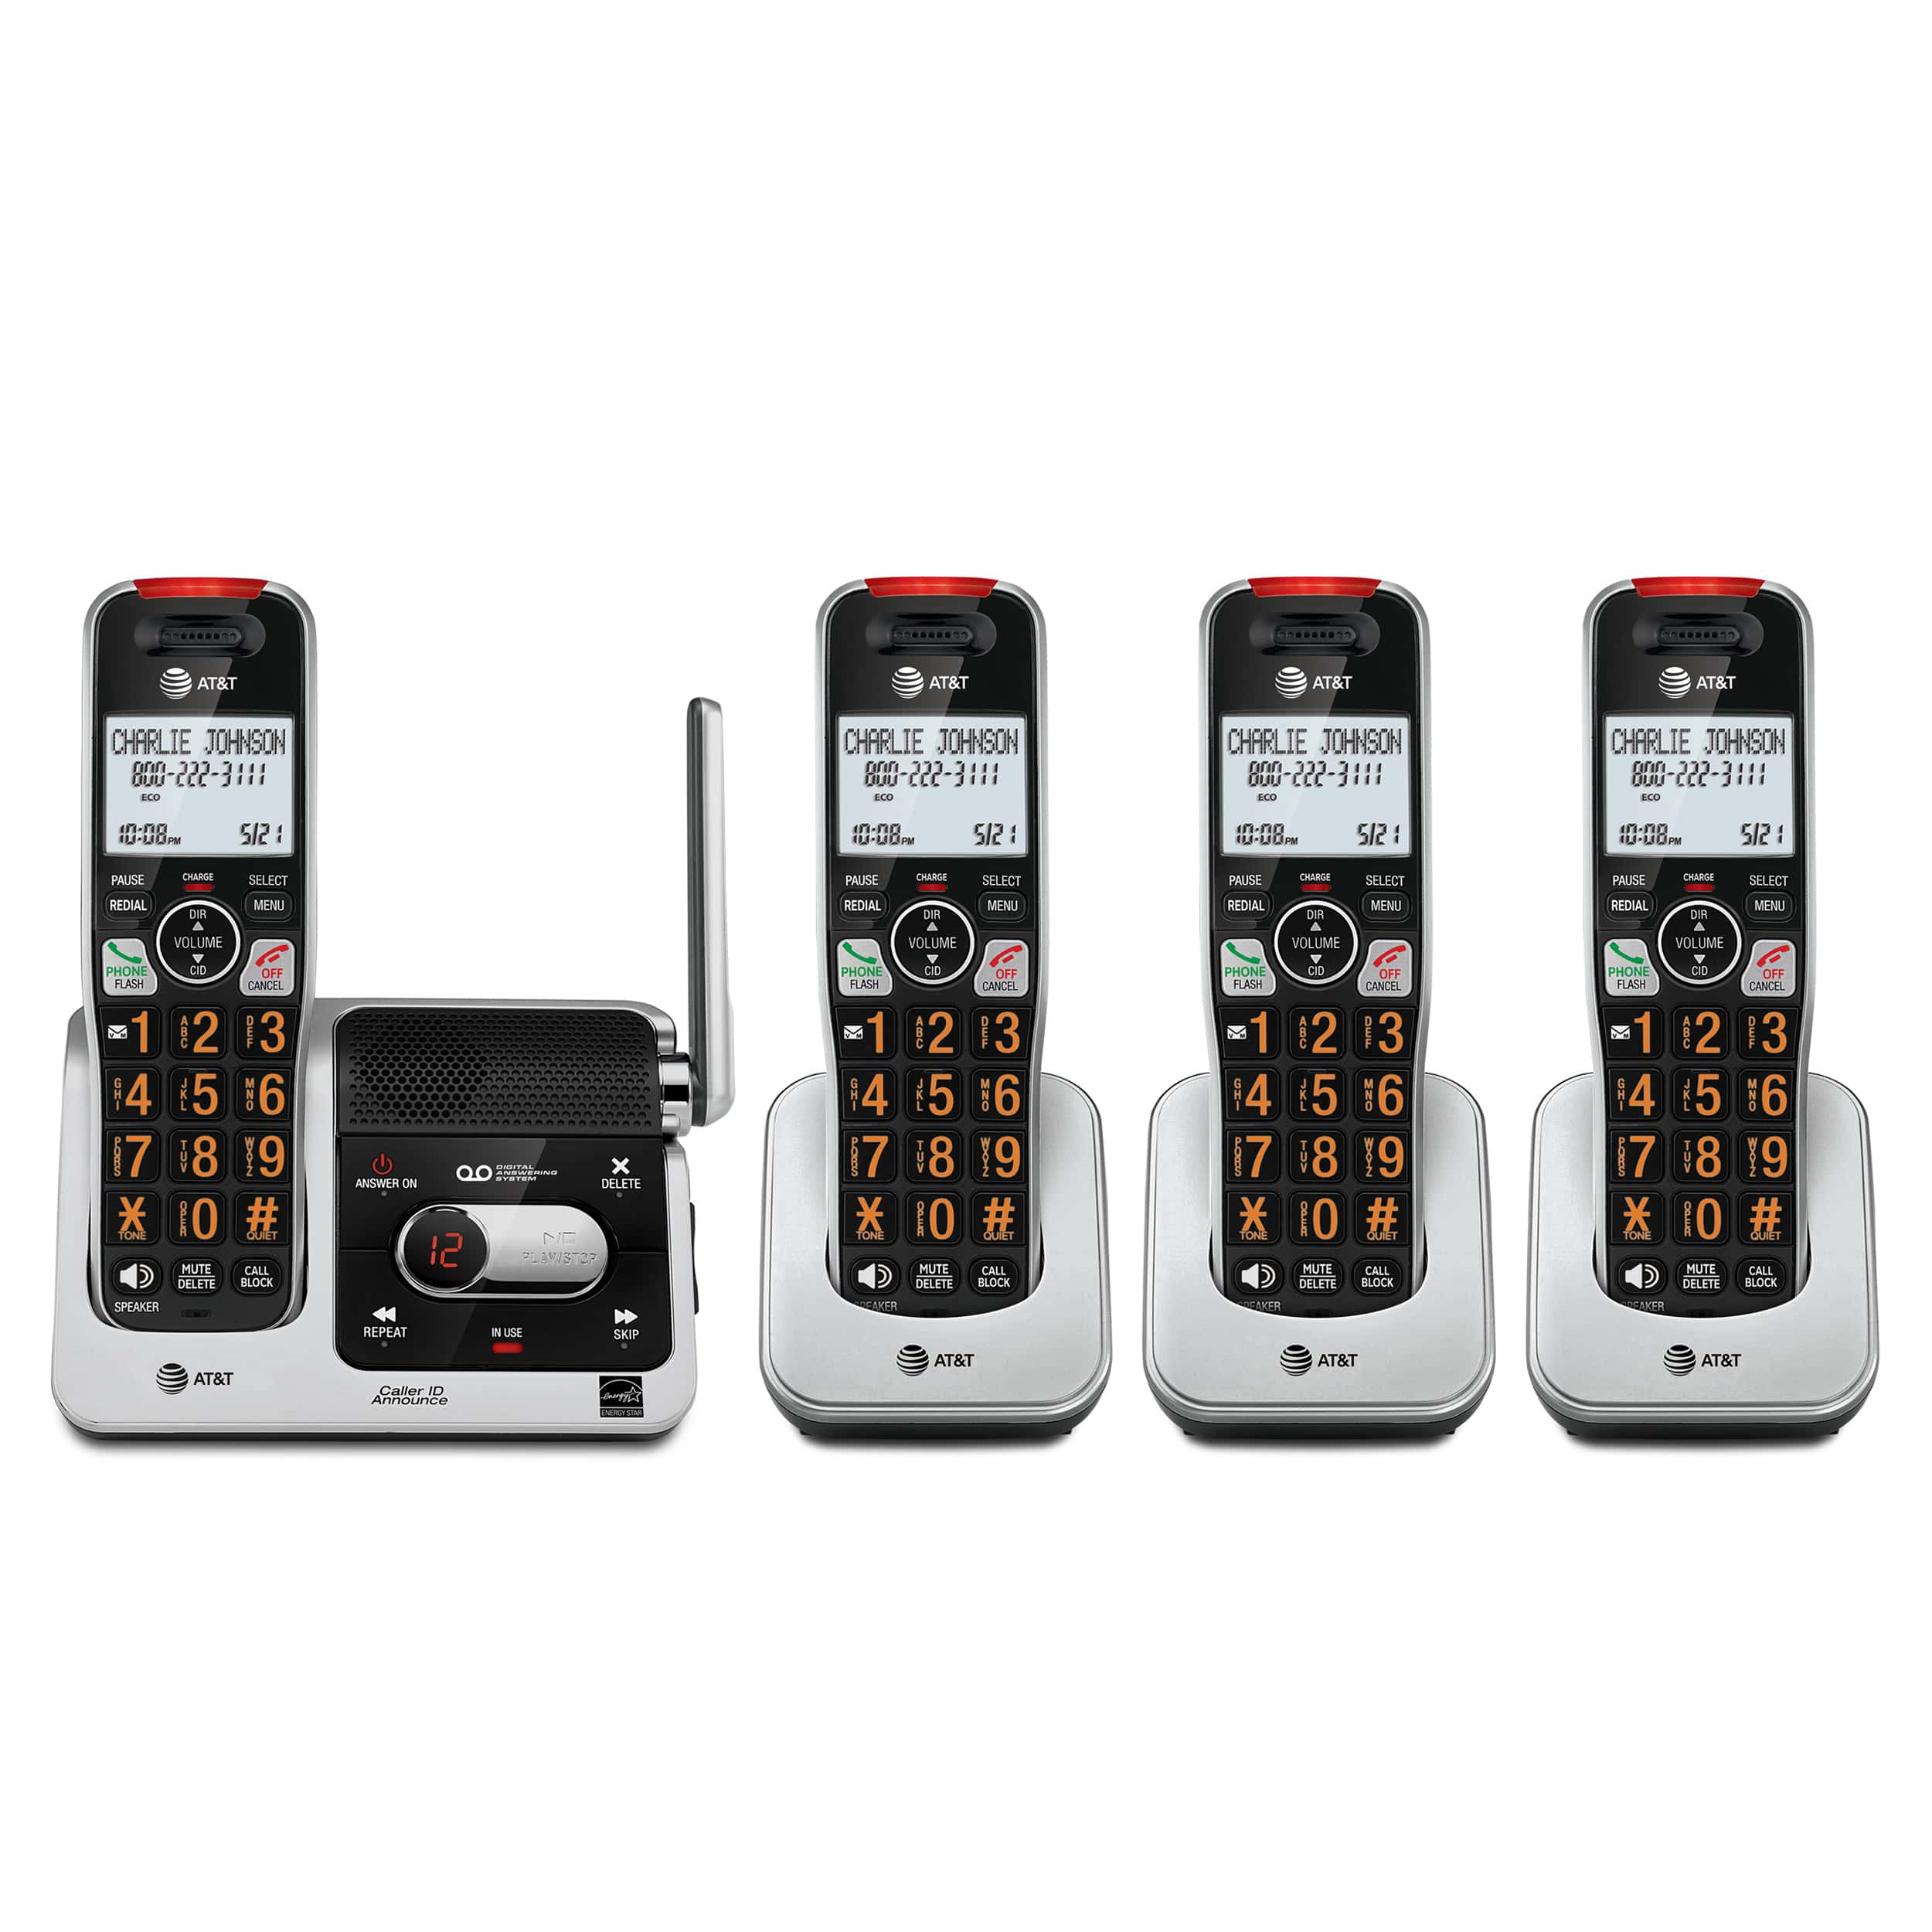 4-Handset Cordless Phone with Unsurpassed Range, Smart Call Blocker and Answering System - view 1